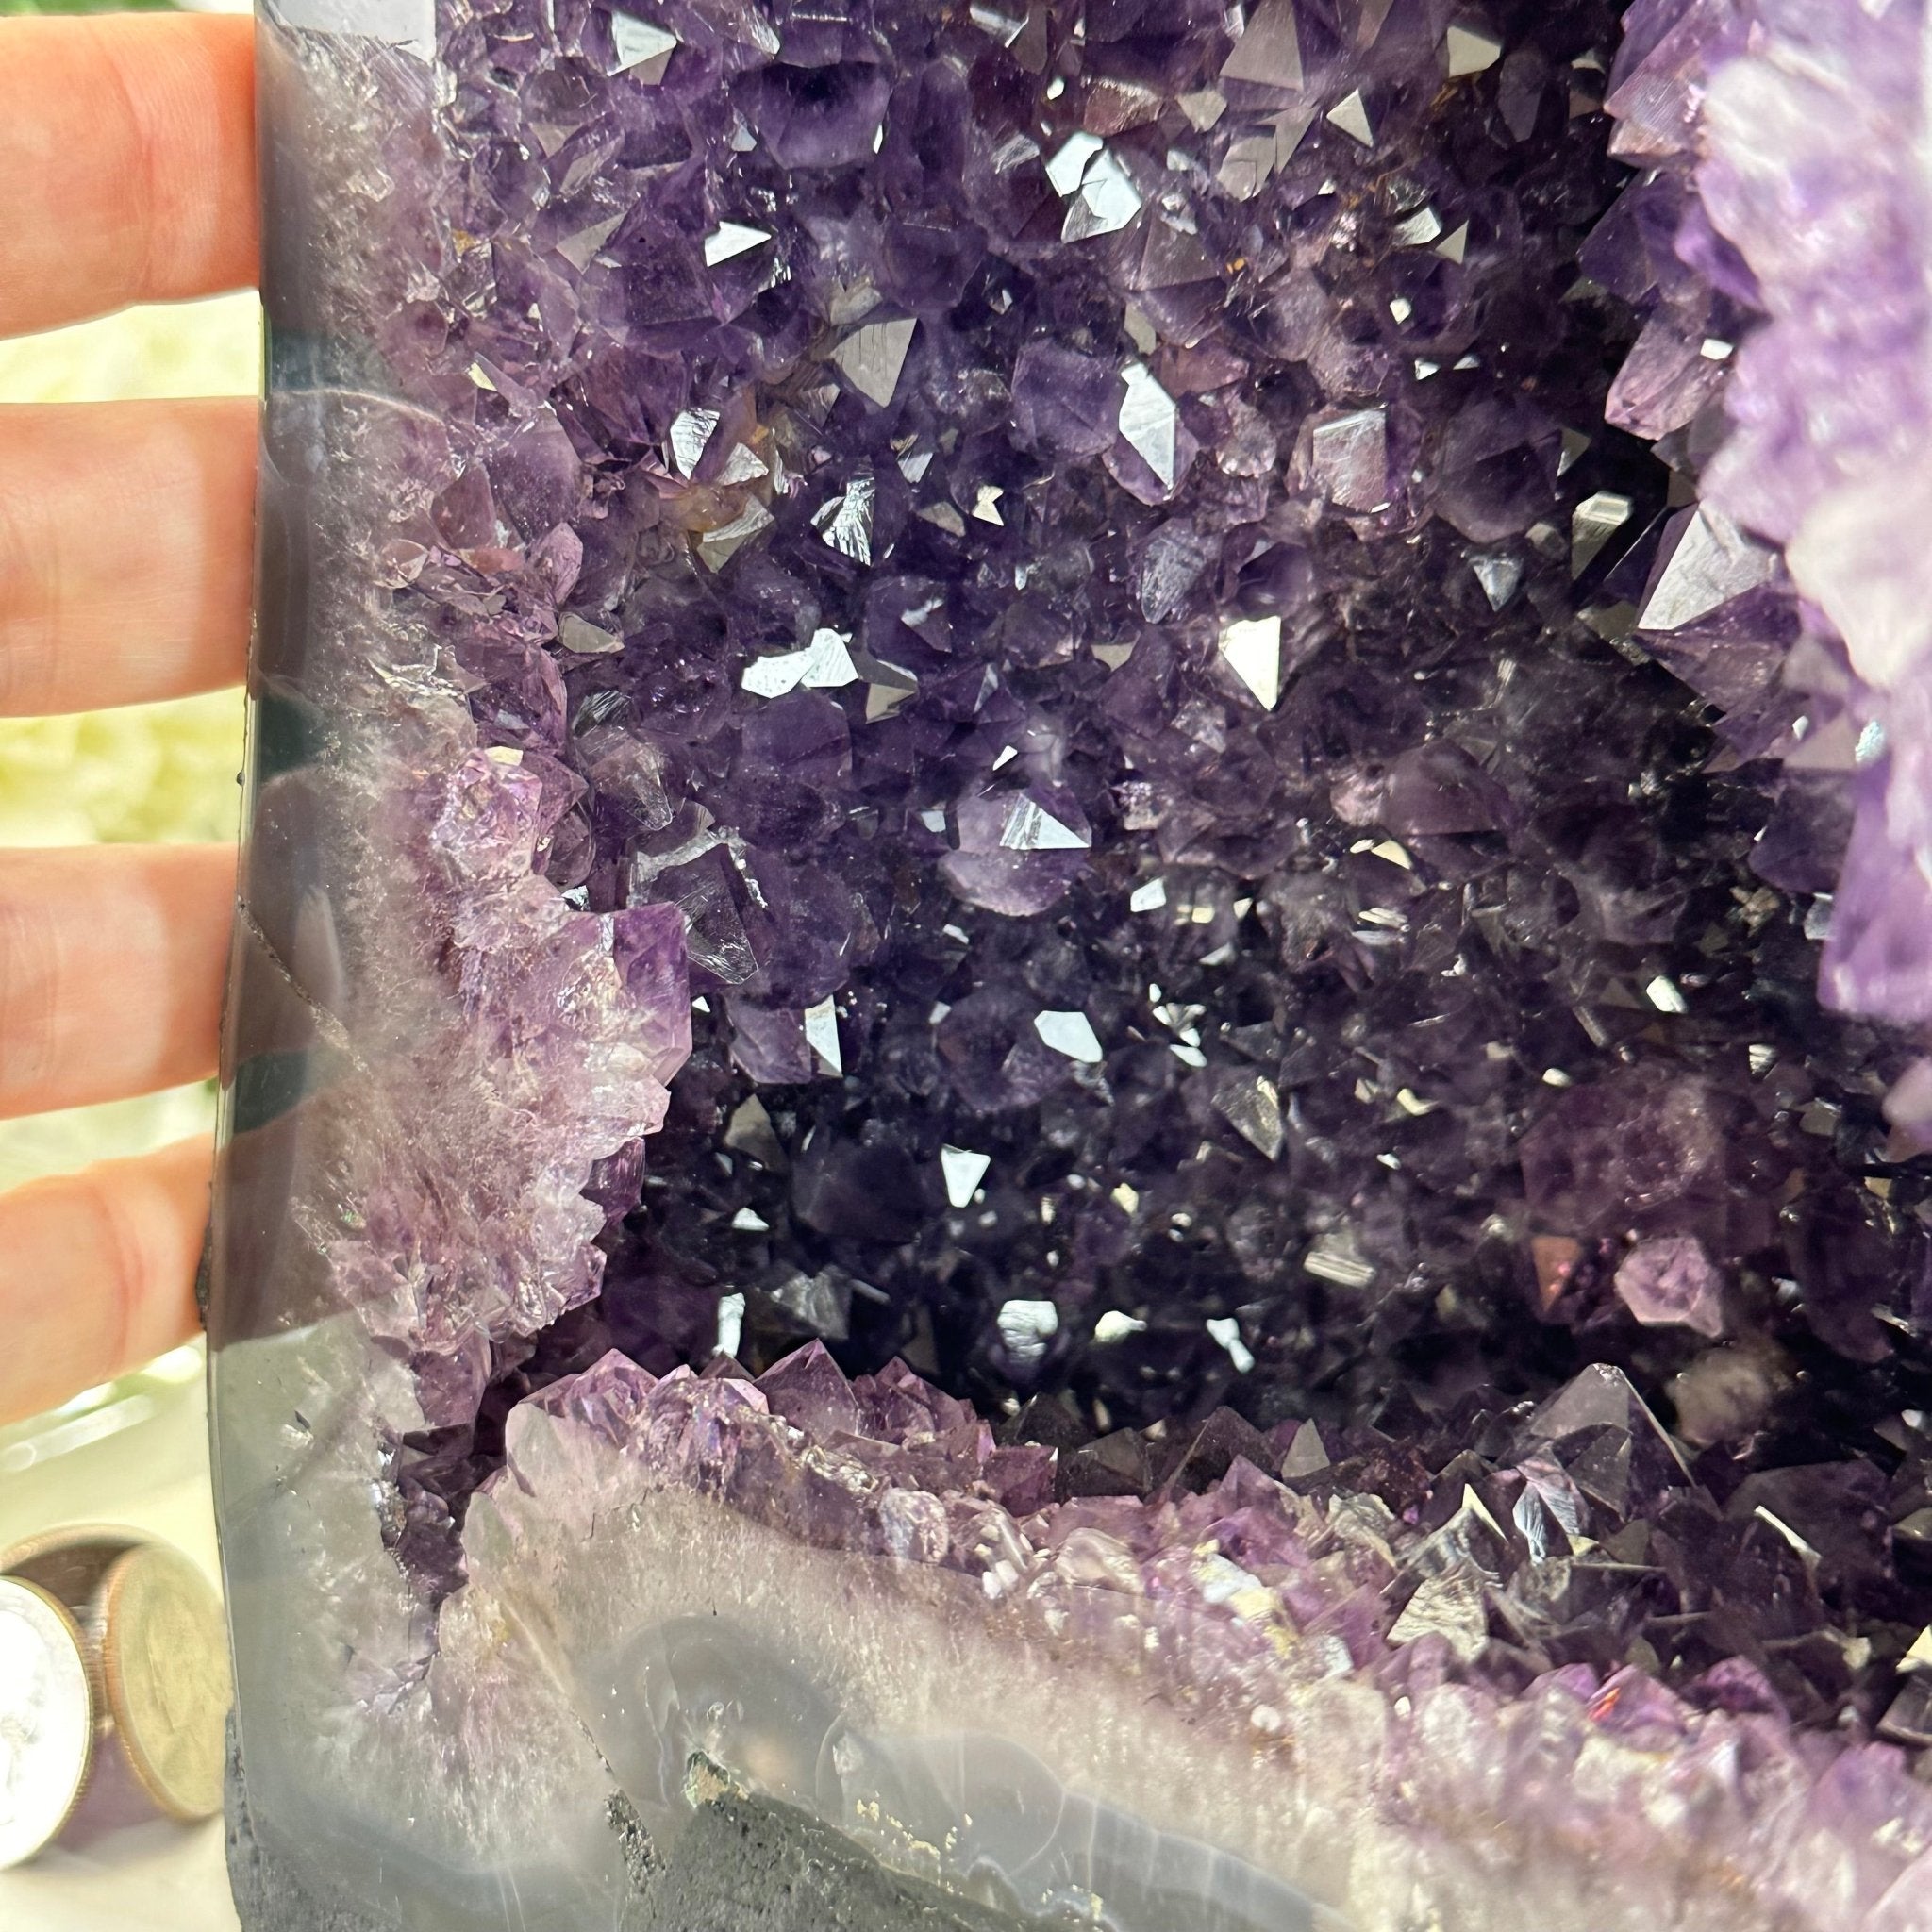 Quality Brazilian Amethyst Cathedral, 11.8 lbs & 9.1" Tall, #5601 - 1356 - Brazil GemsBrazil GemsQuality Brazilian Amethyst Cathedral, 11.8 lbs & 9.1" Tall, #5601 - 1356Cathedrals5601 - 1356